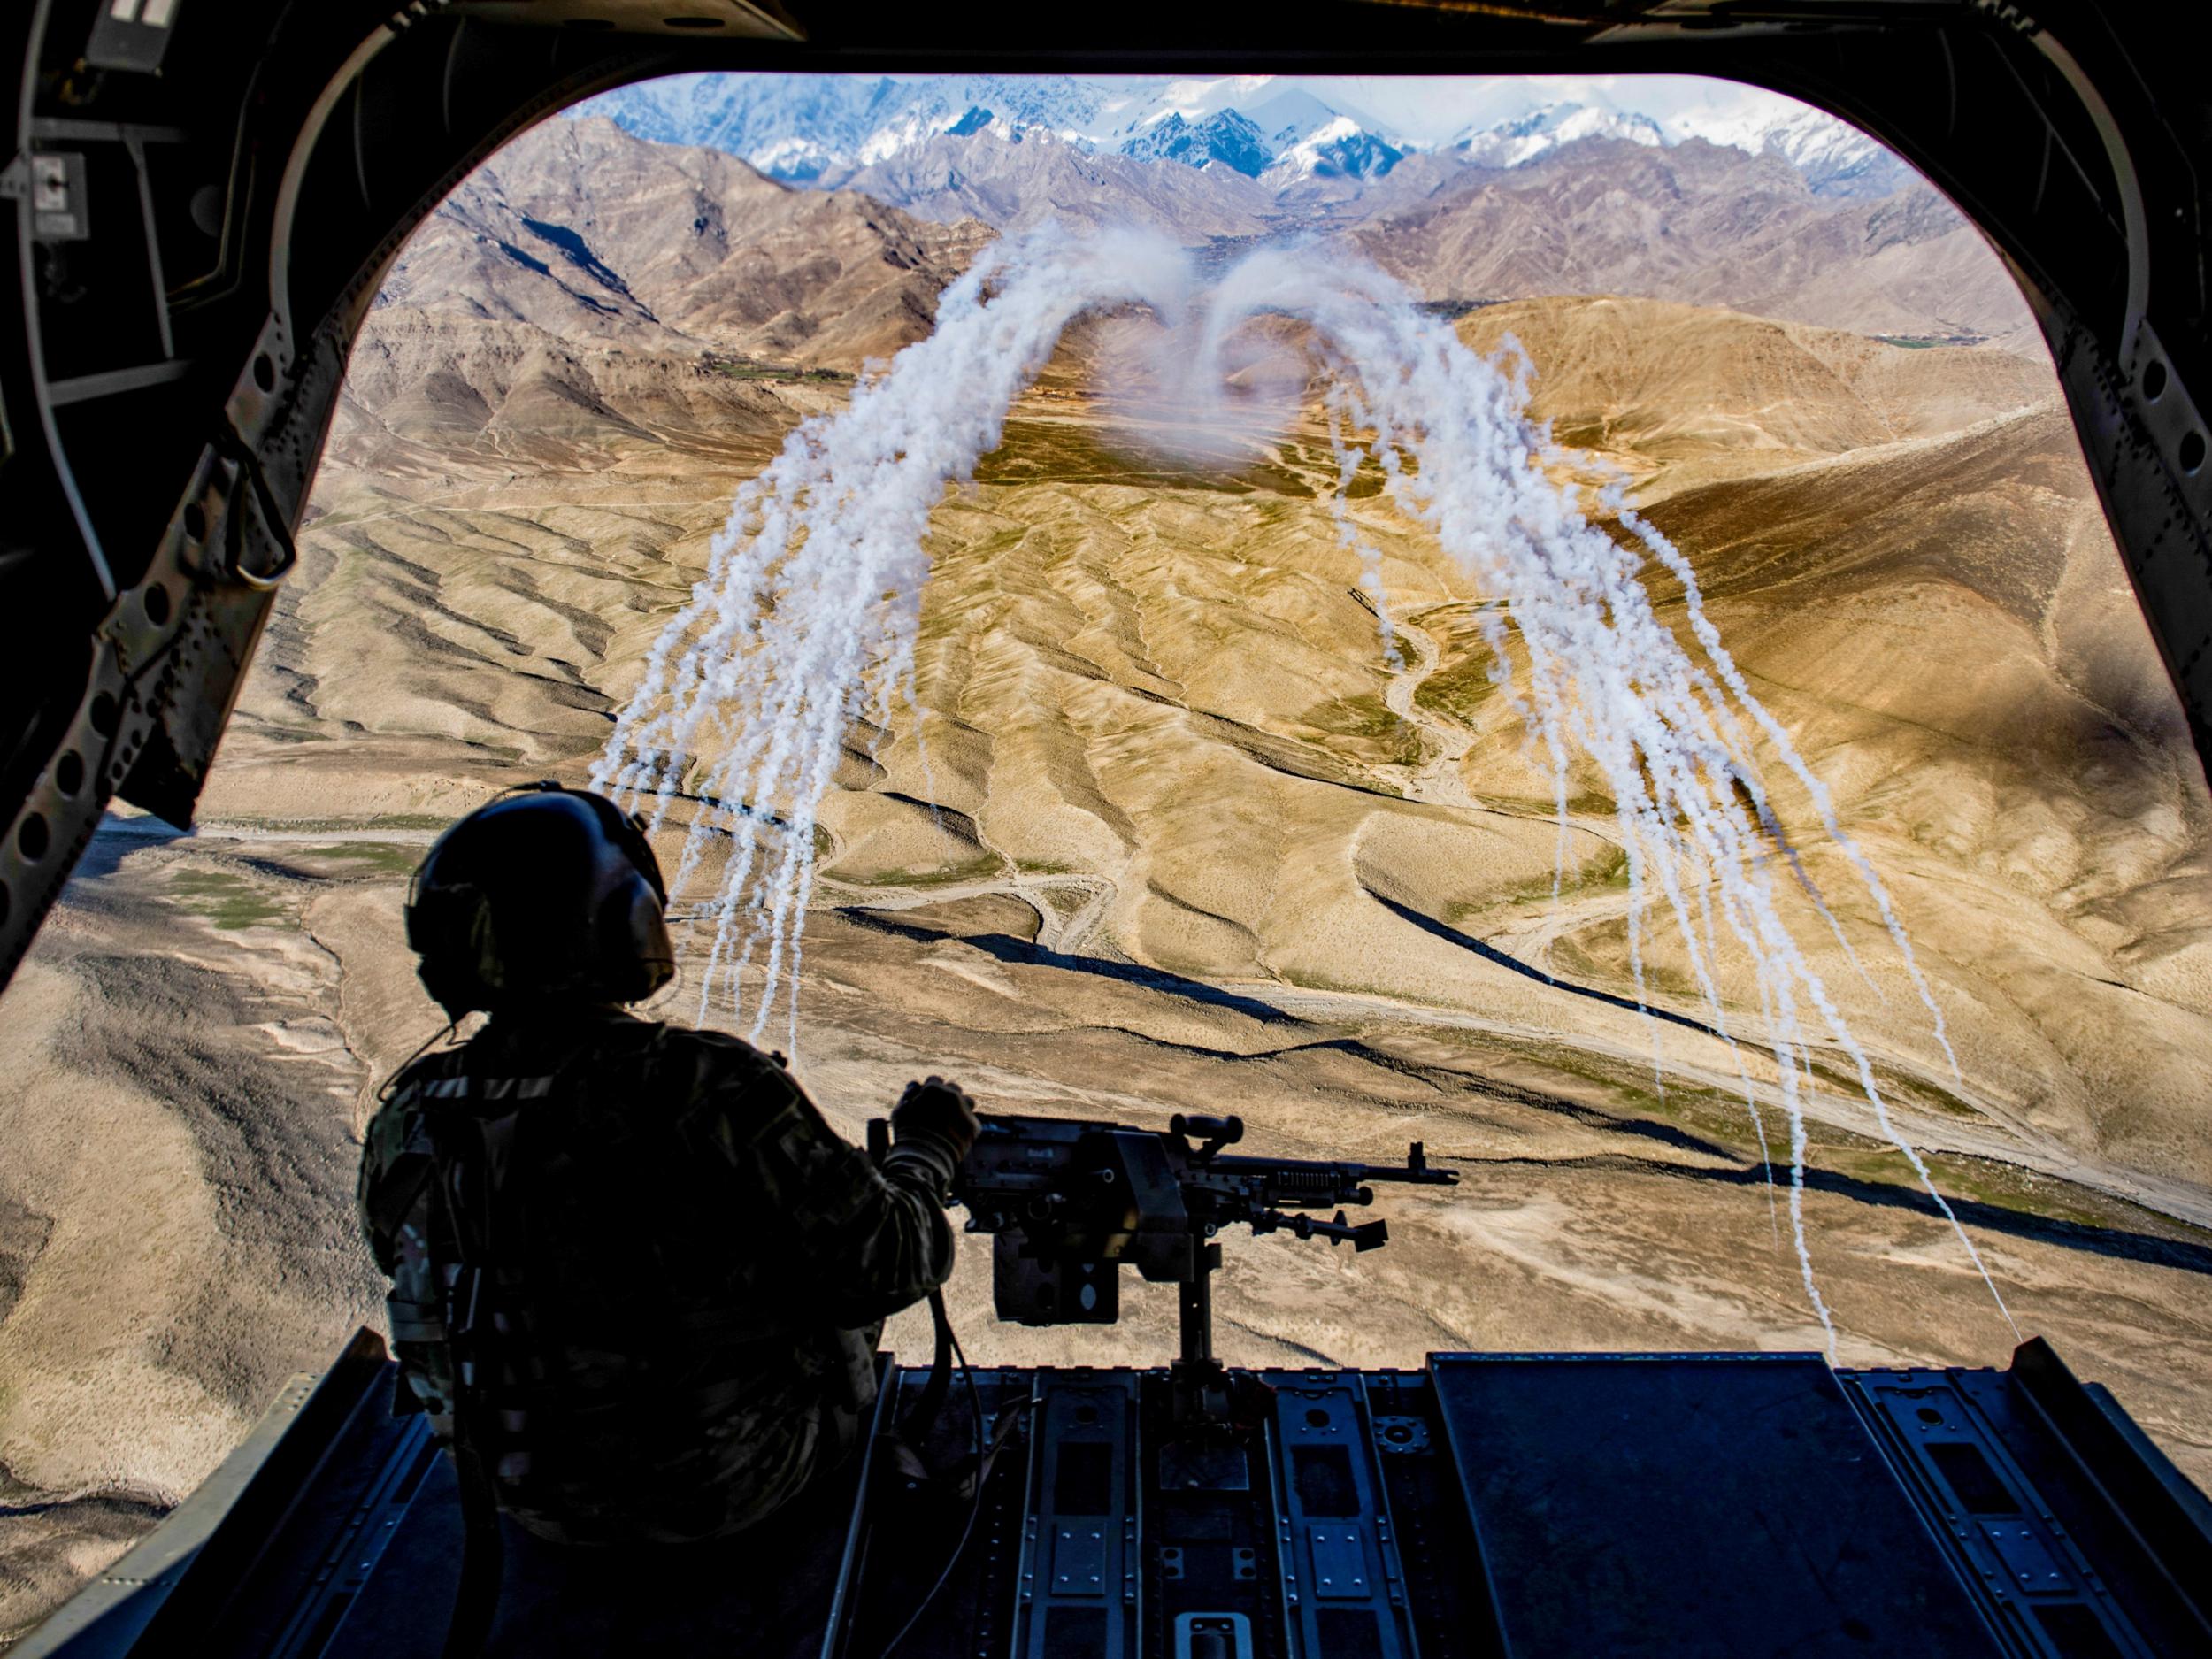 A U.S. Army crew chief flying on board a CH-47F Chinook helicopter observes the successful test of flares during a training flight in Afghanistan